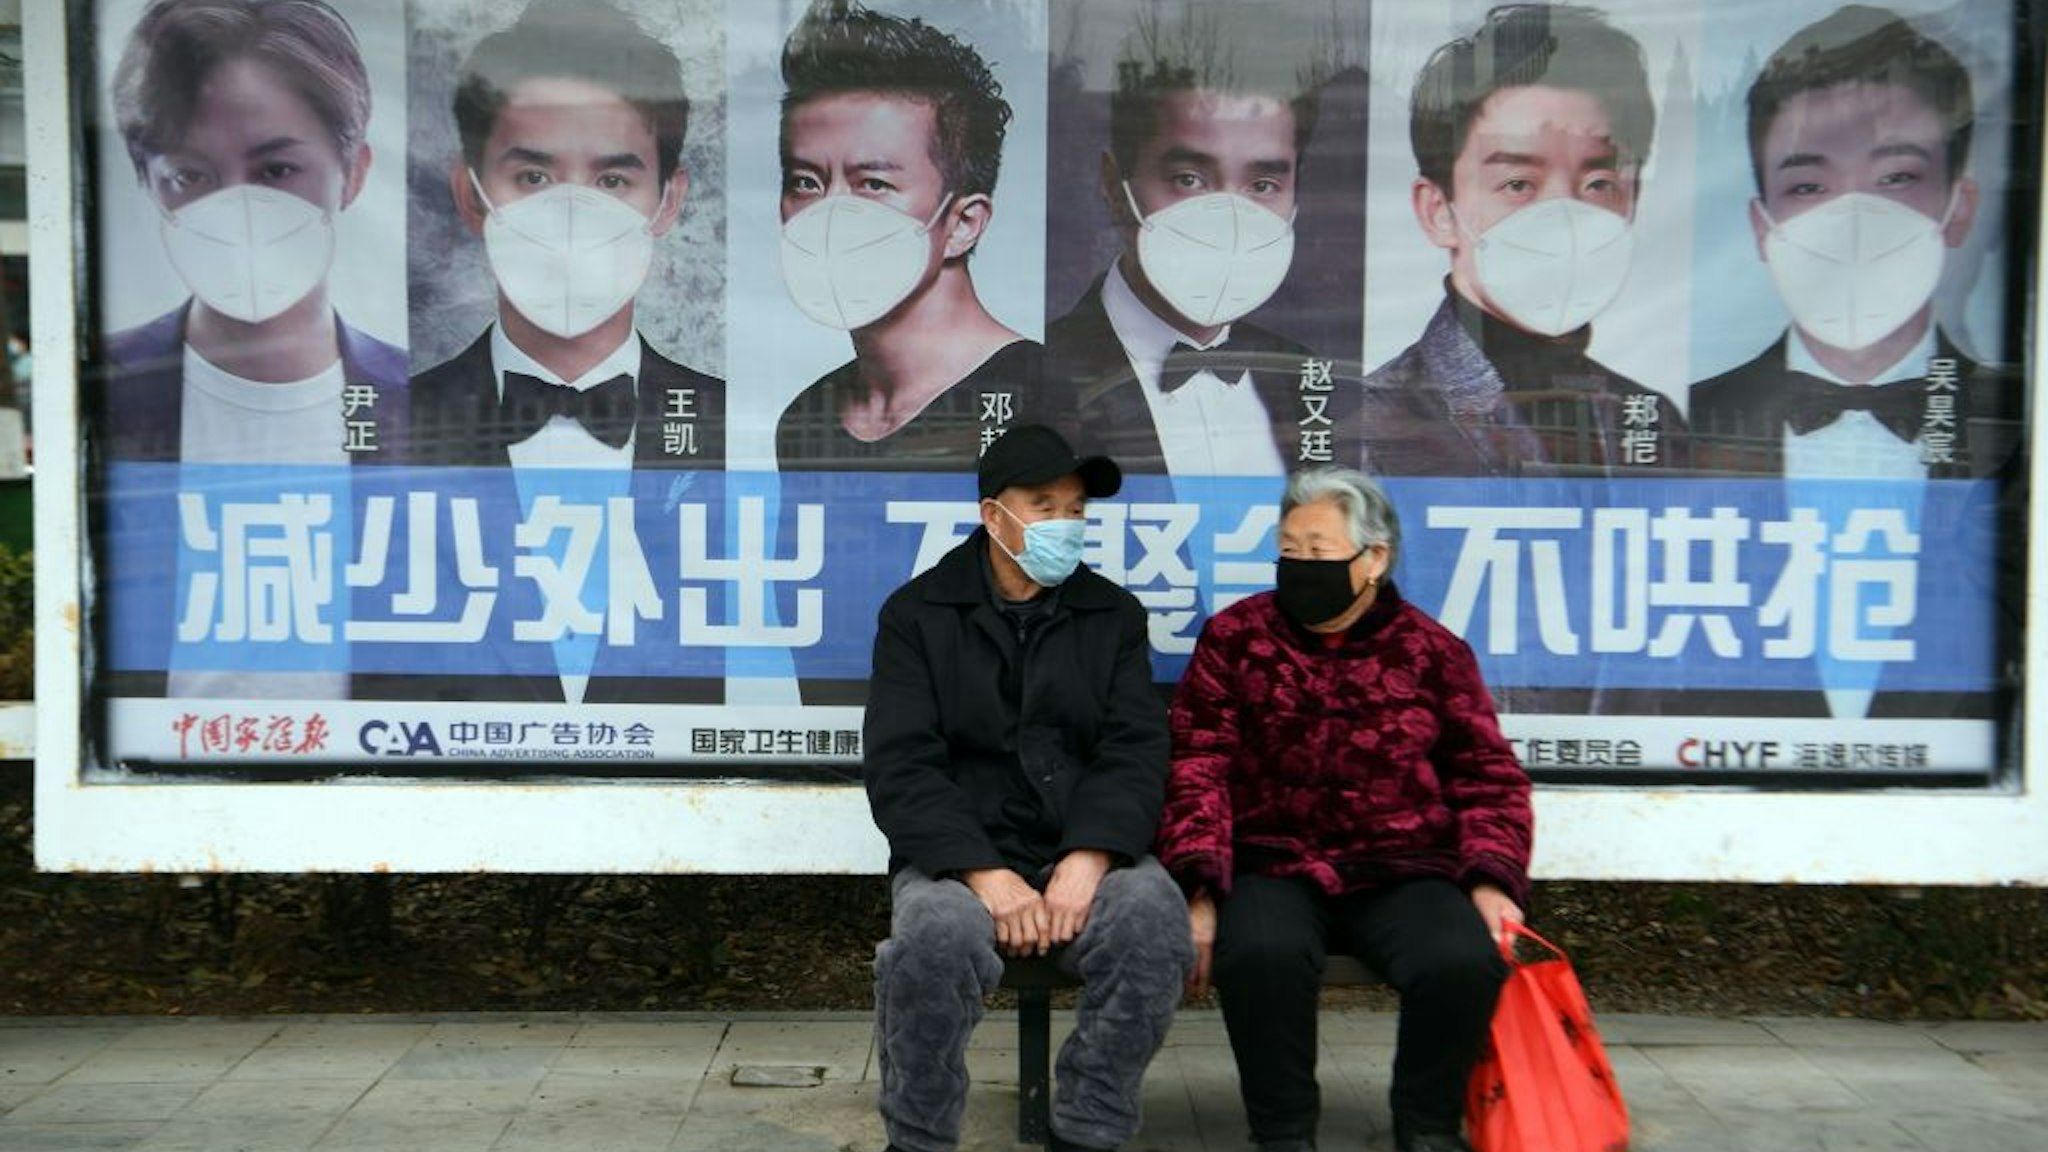 A man and woman sit in front of a poster reminding citizens to wear face masks as a preventive measure against the COVID-19 coronavirus, at a bus stop in Bozhou, in China's eastern Anhui province on March 6, 2020. - China reported 30 more deaths from the new coronavirus outbreak on March 6, with fresh infections rising for a second straight day and 16 new cases imported from overseas. (Photo by STR / AFP)